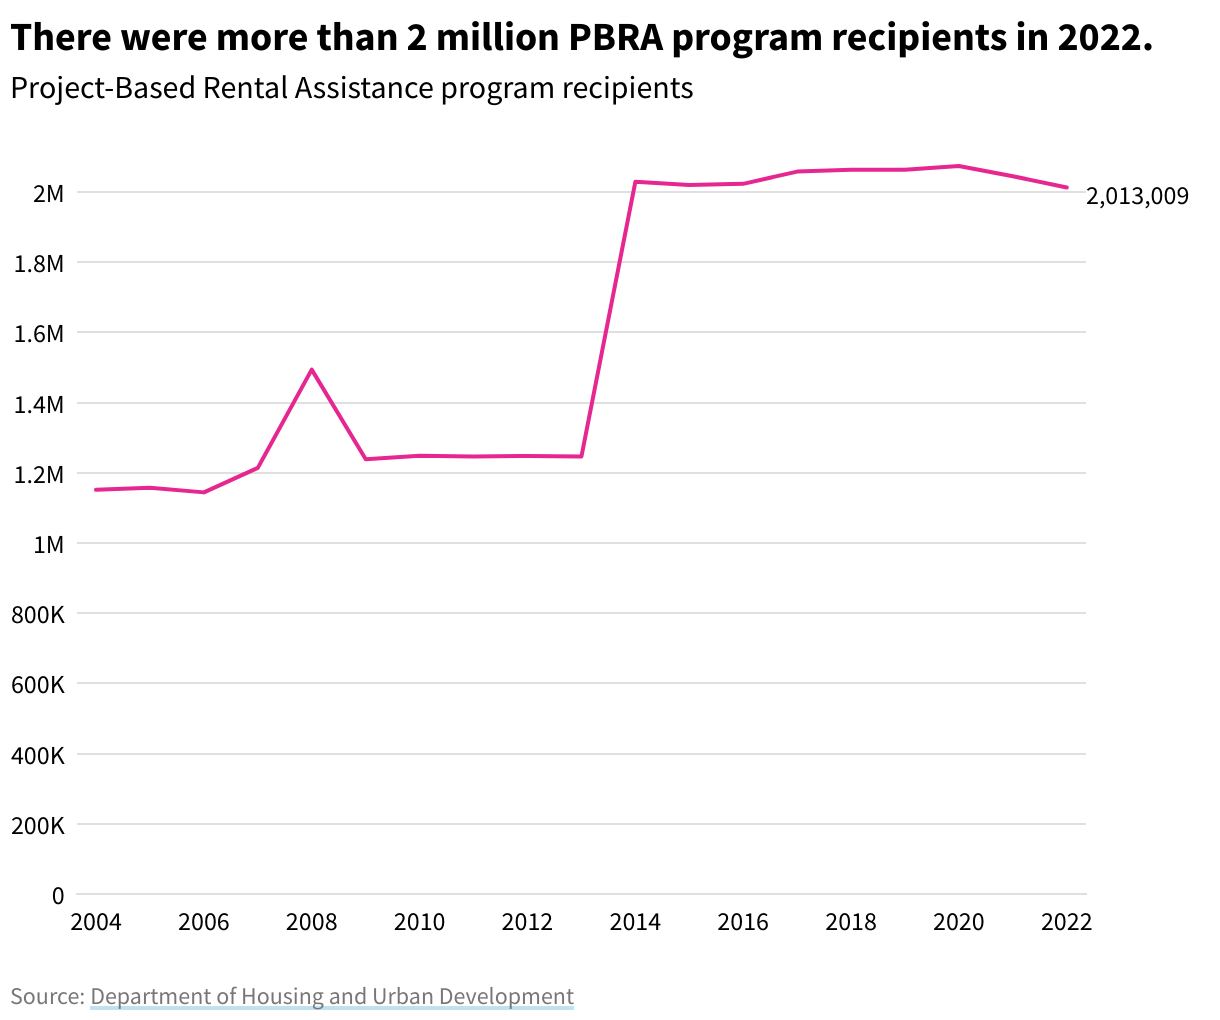 Line chart showing total Project-Based Rental Assistance program recipients from 2004 to 2022. In 2022, there were 2,013,009.